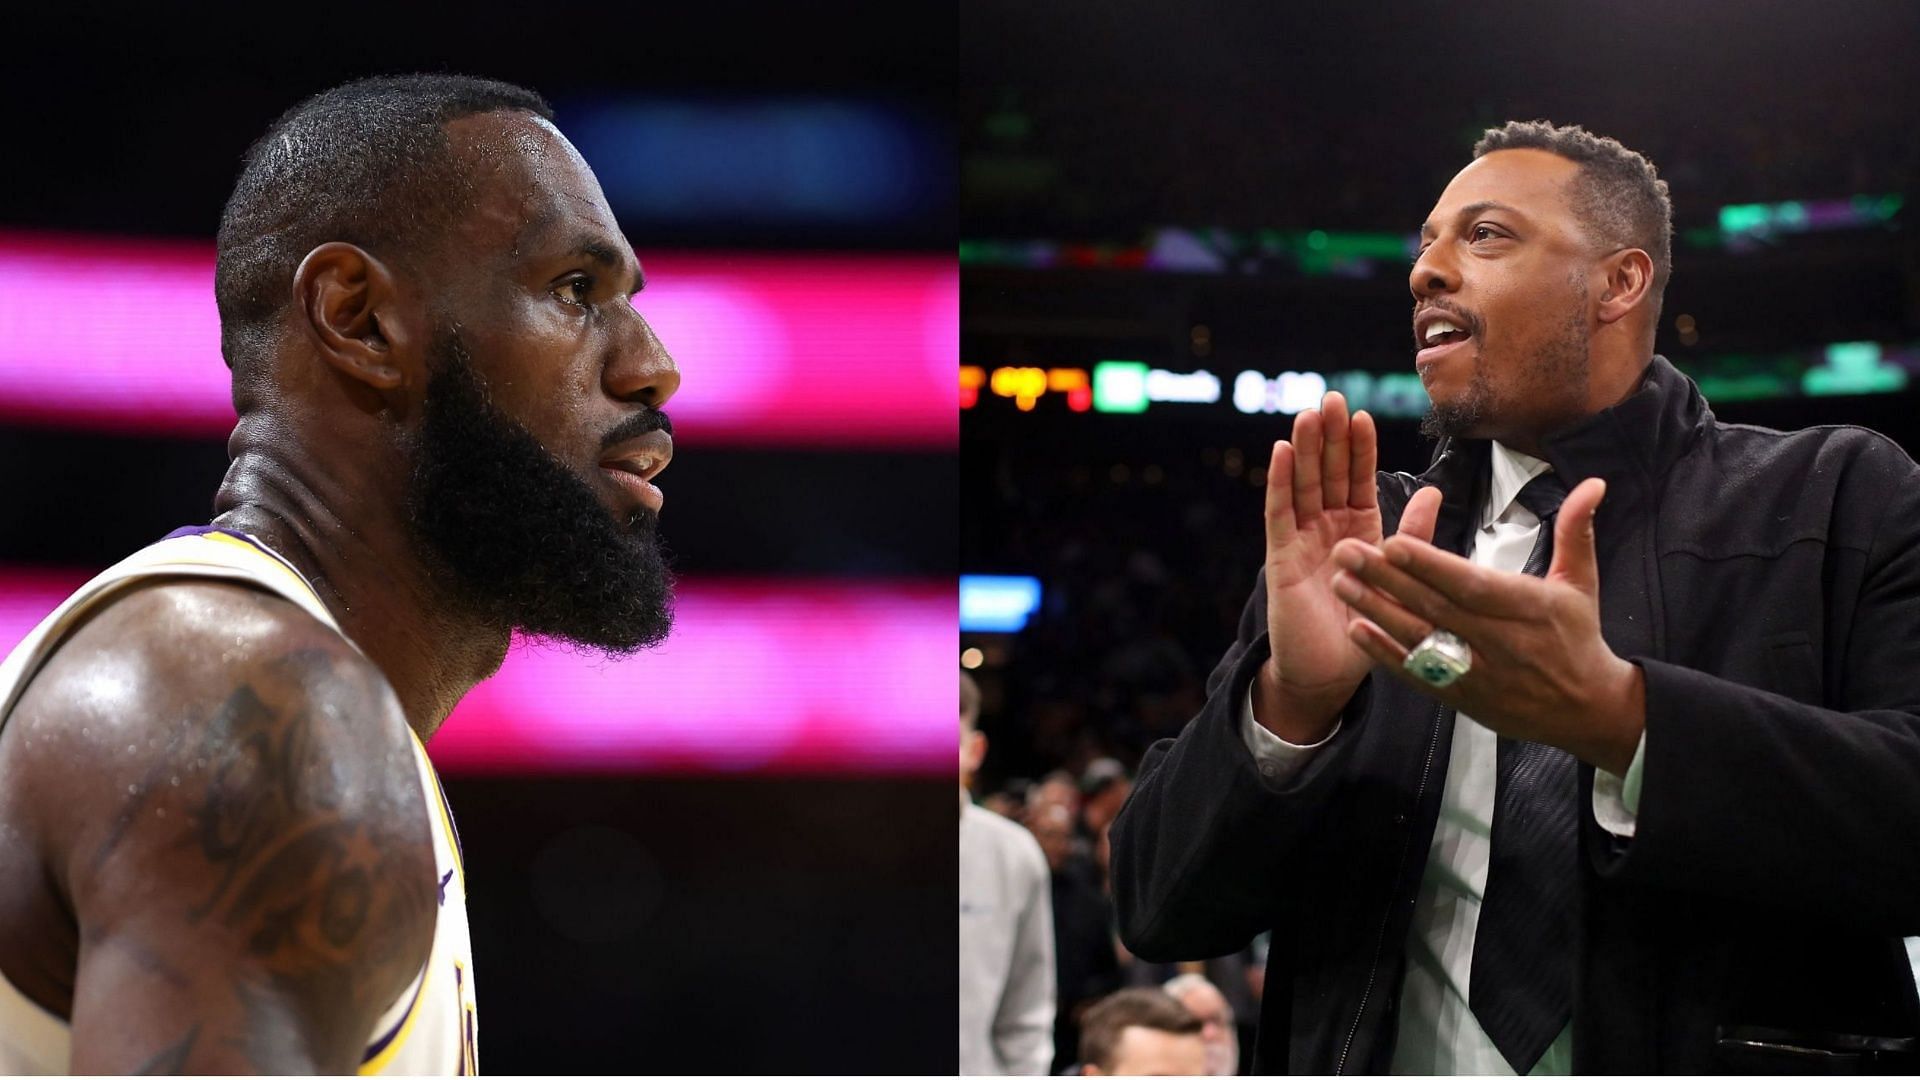 Paul Pierce says LeBron James can solidify his GOAT claims by leading the Lakers to a title from unlikely spot